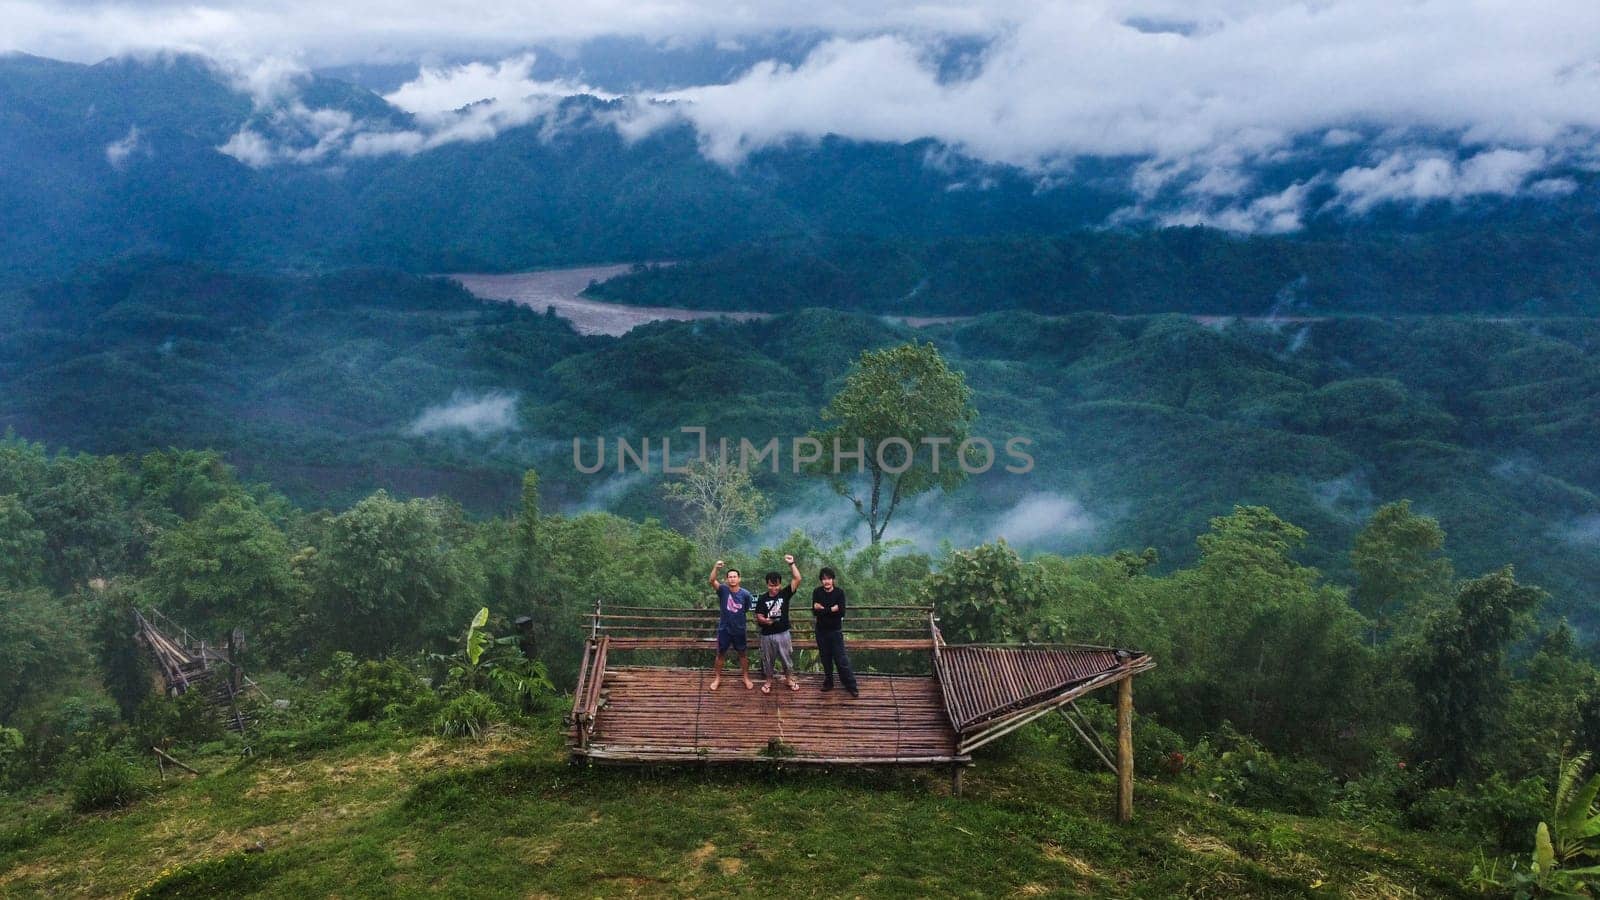 June 24, 2023; Mae Hong Son, Thailand - Group of young tourists taking photos by drone against the landscape of misty valley and cloudy mountains in Thailand.